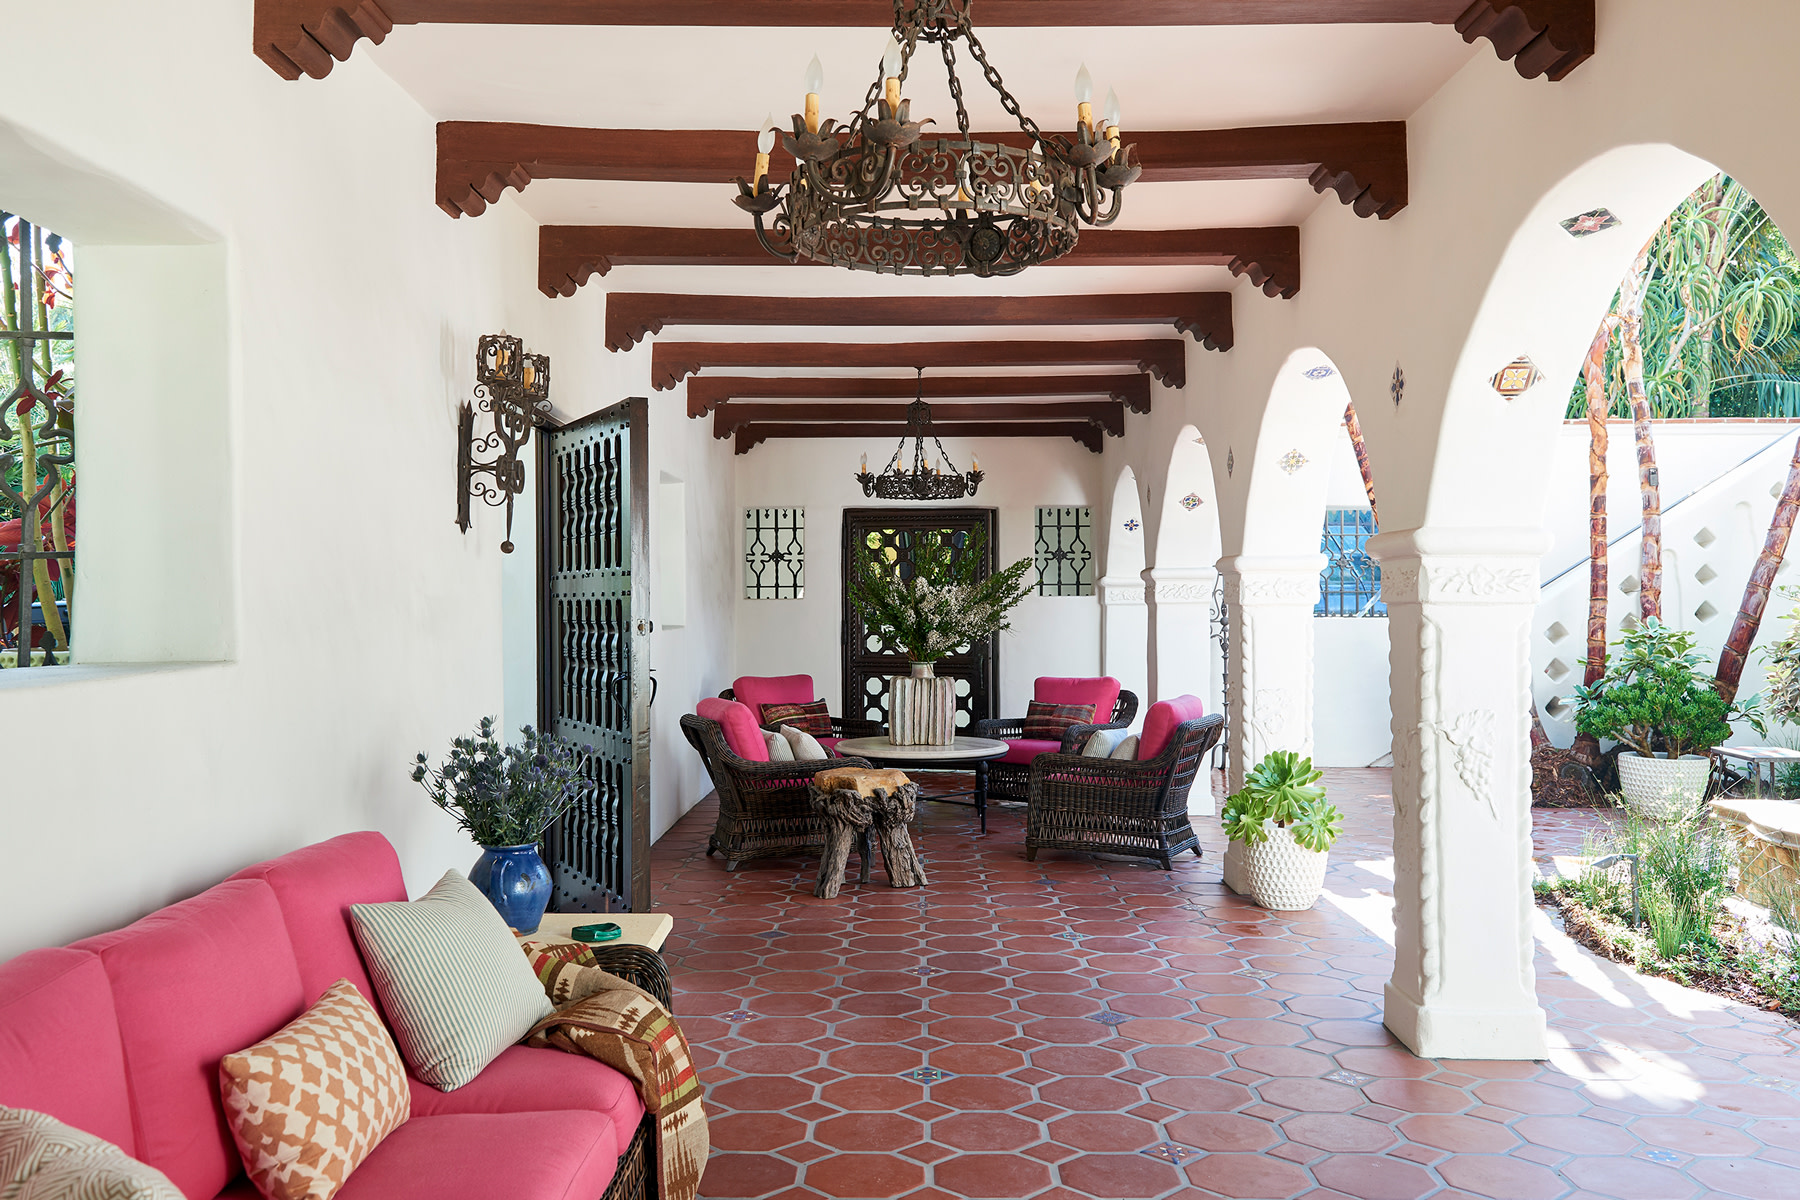 Spanish Colonial Architecture